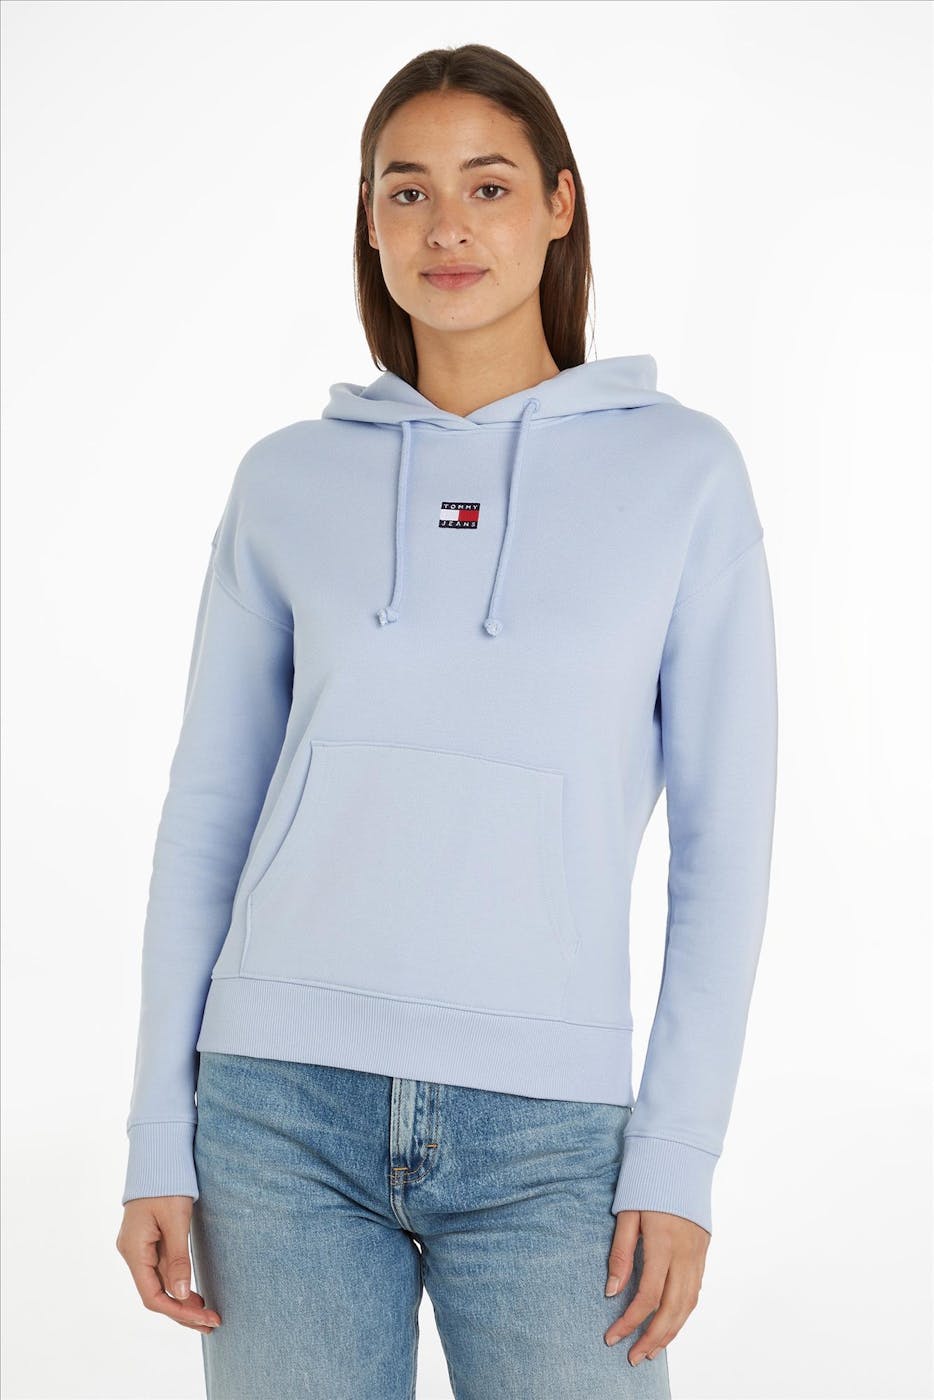 Tommy Jeans - Lichtblauwe Boxy Badge hoodie